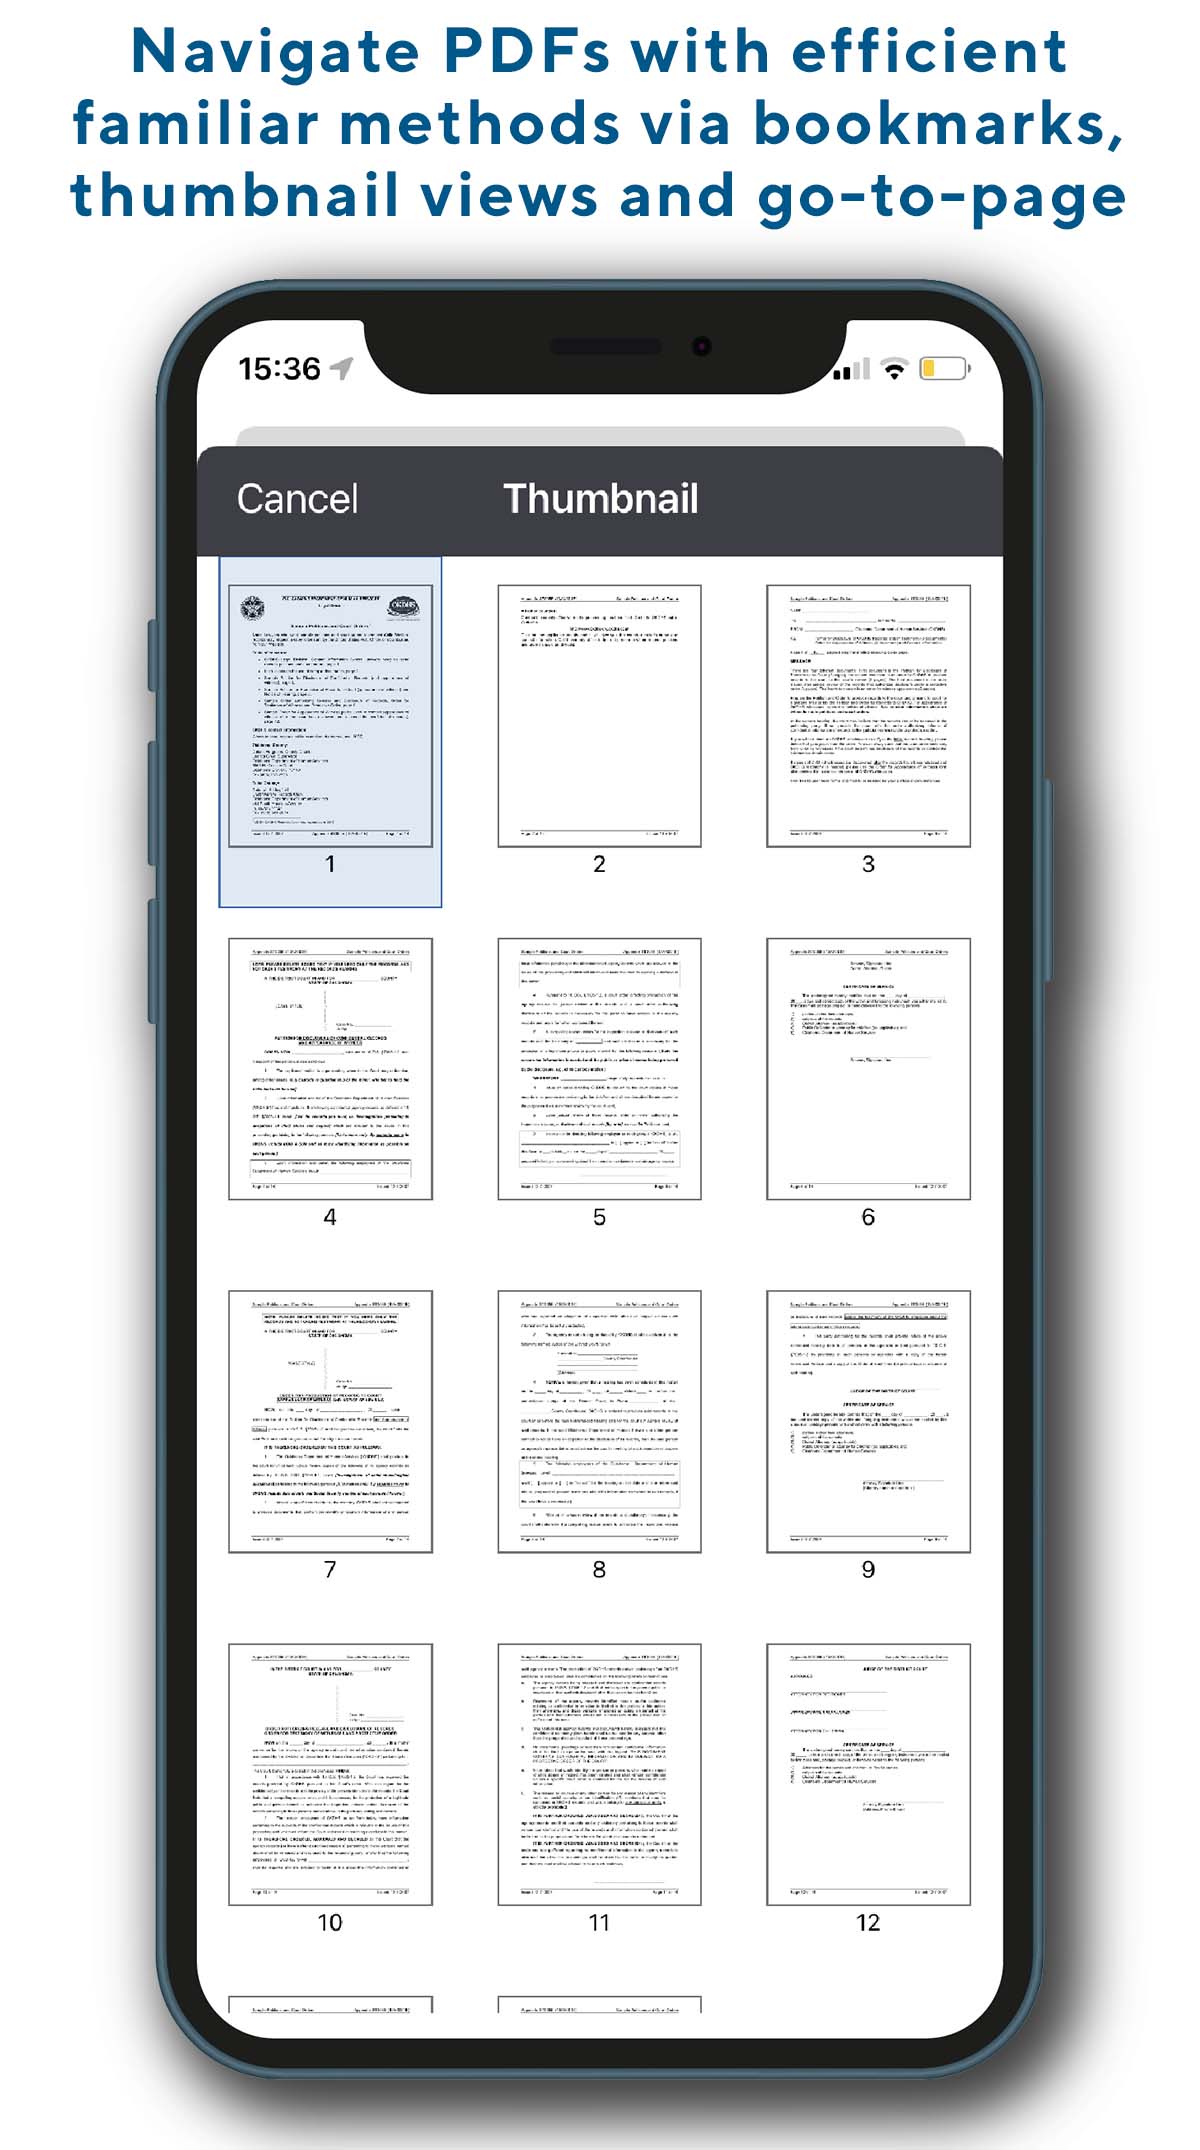 Navigate PDFs with efficient familiar methods via bookmarks, thumbnail views and go-to-page